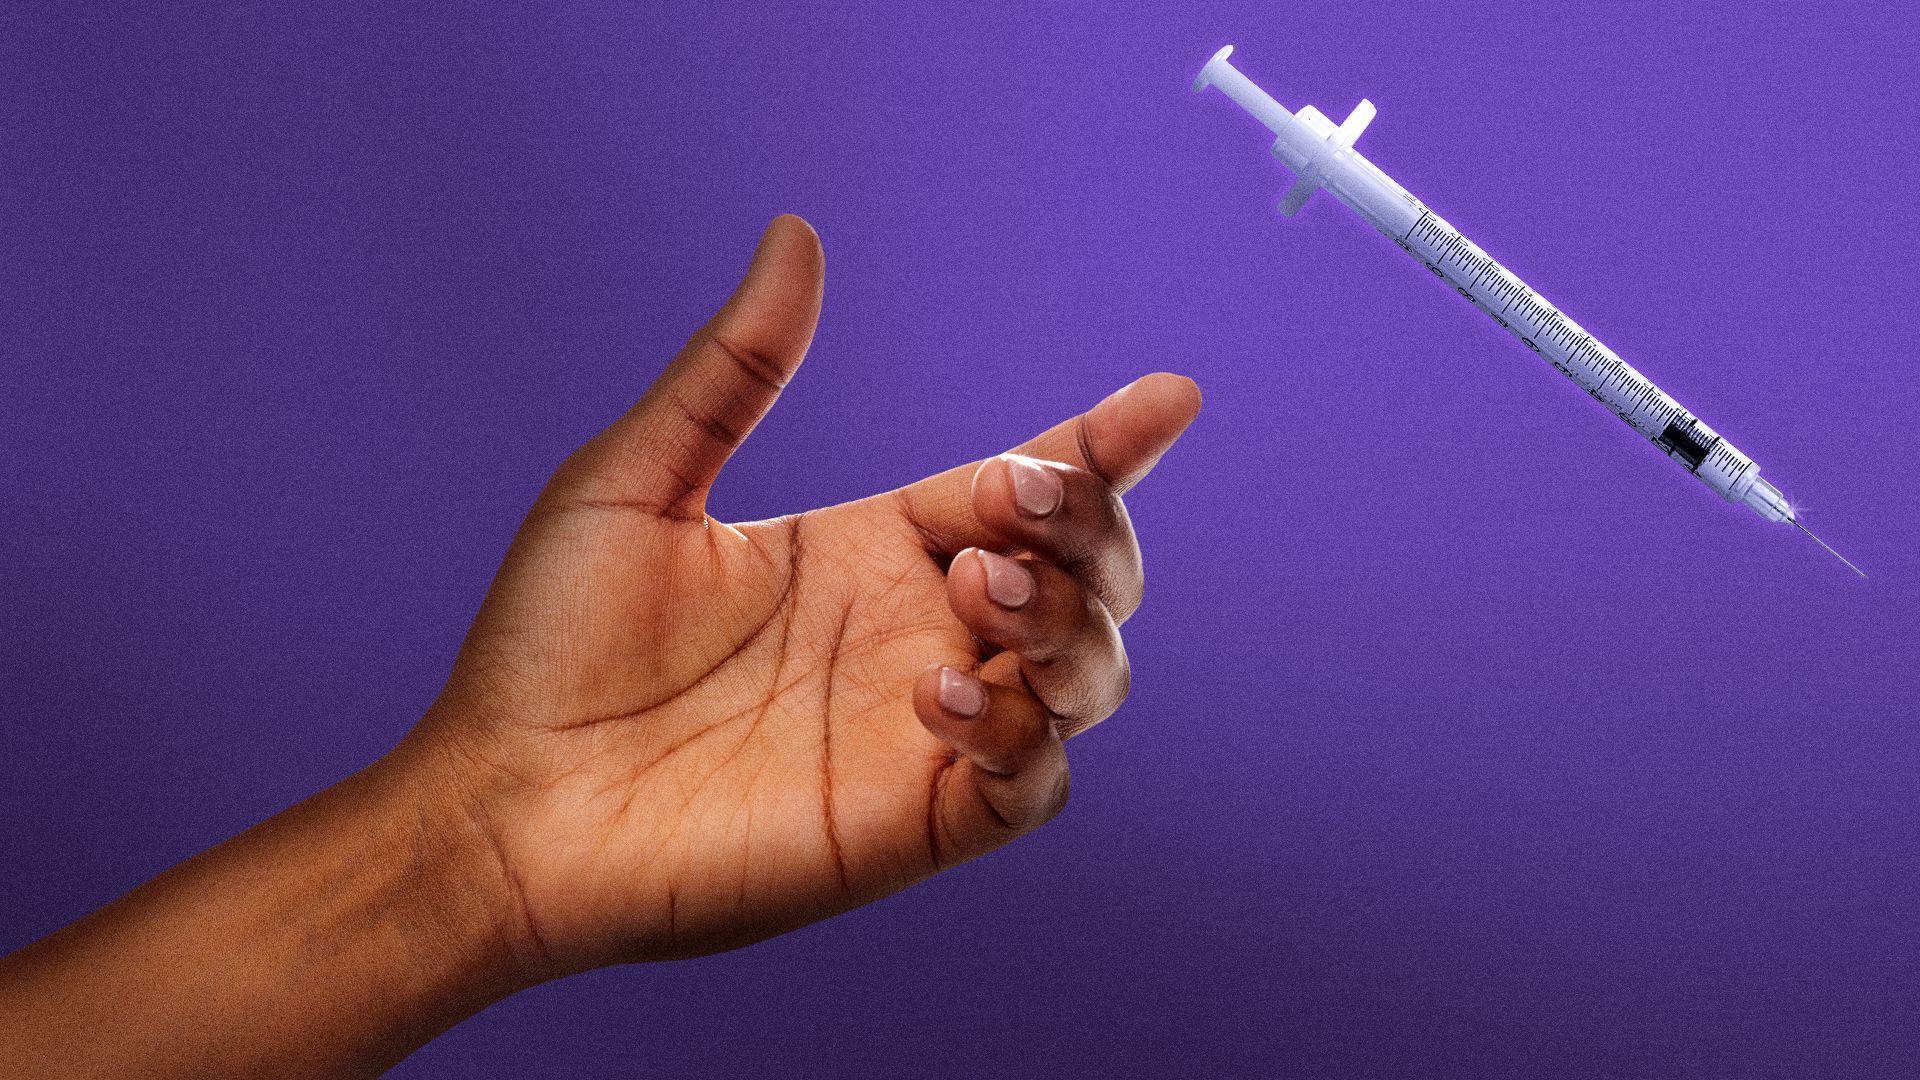 Illustration of a hand reaching for a syringe.